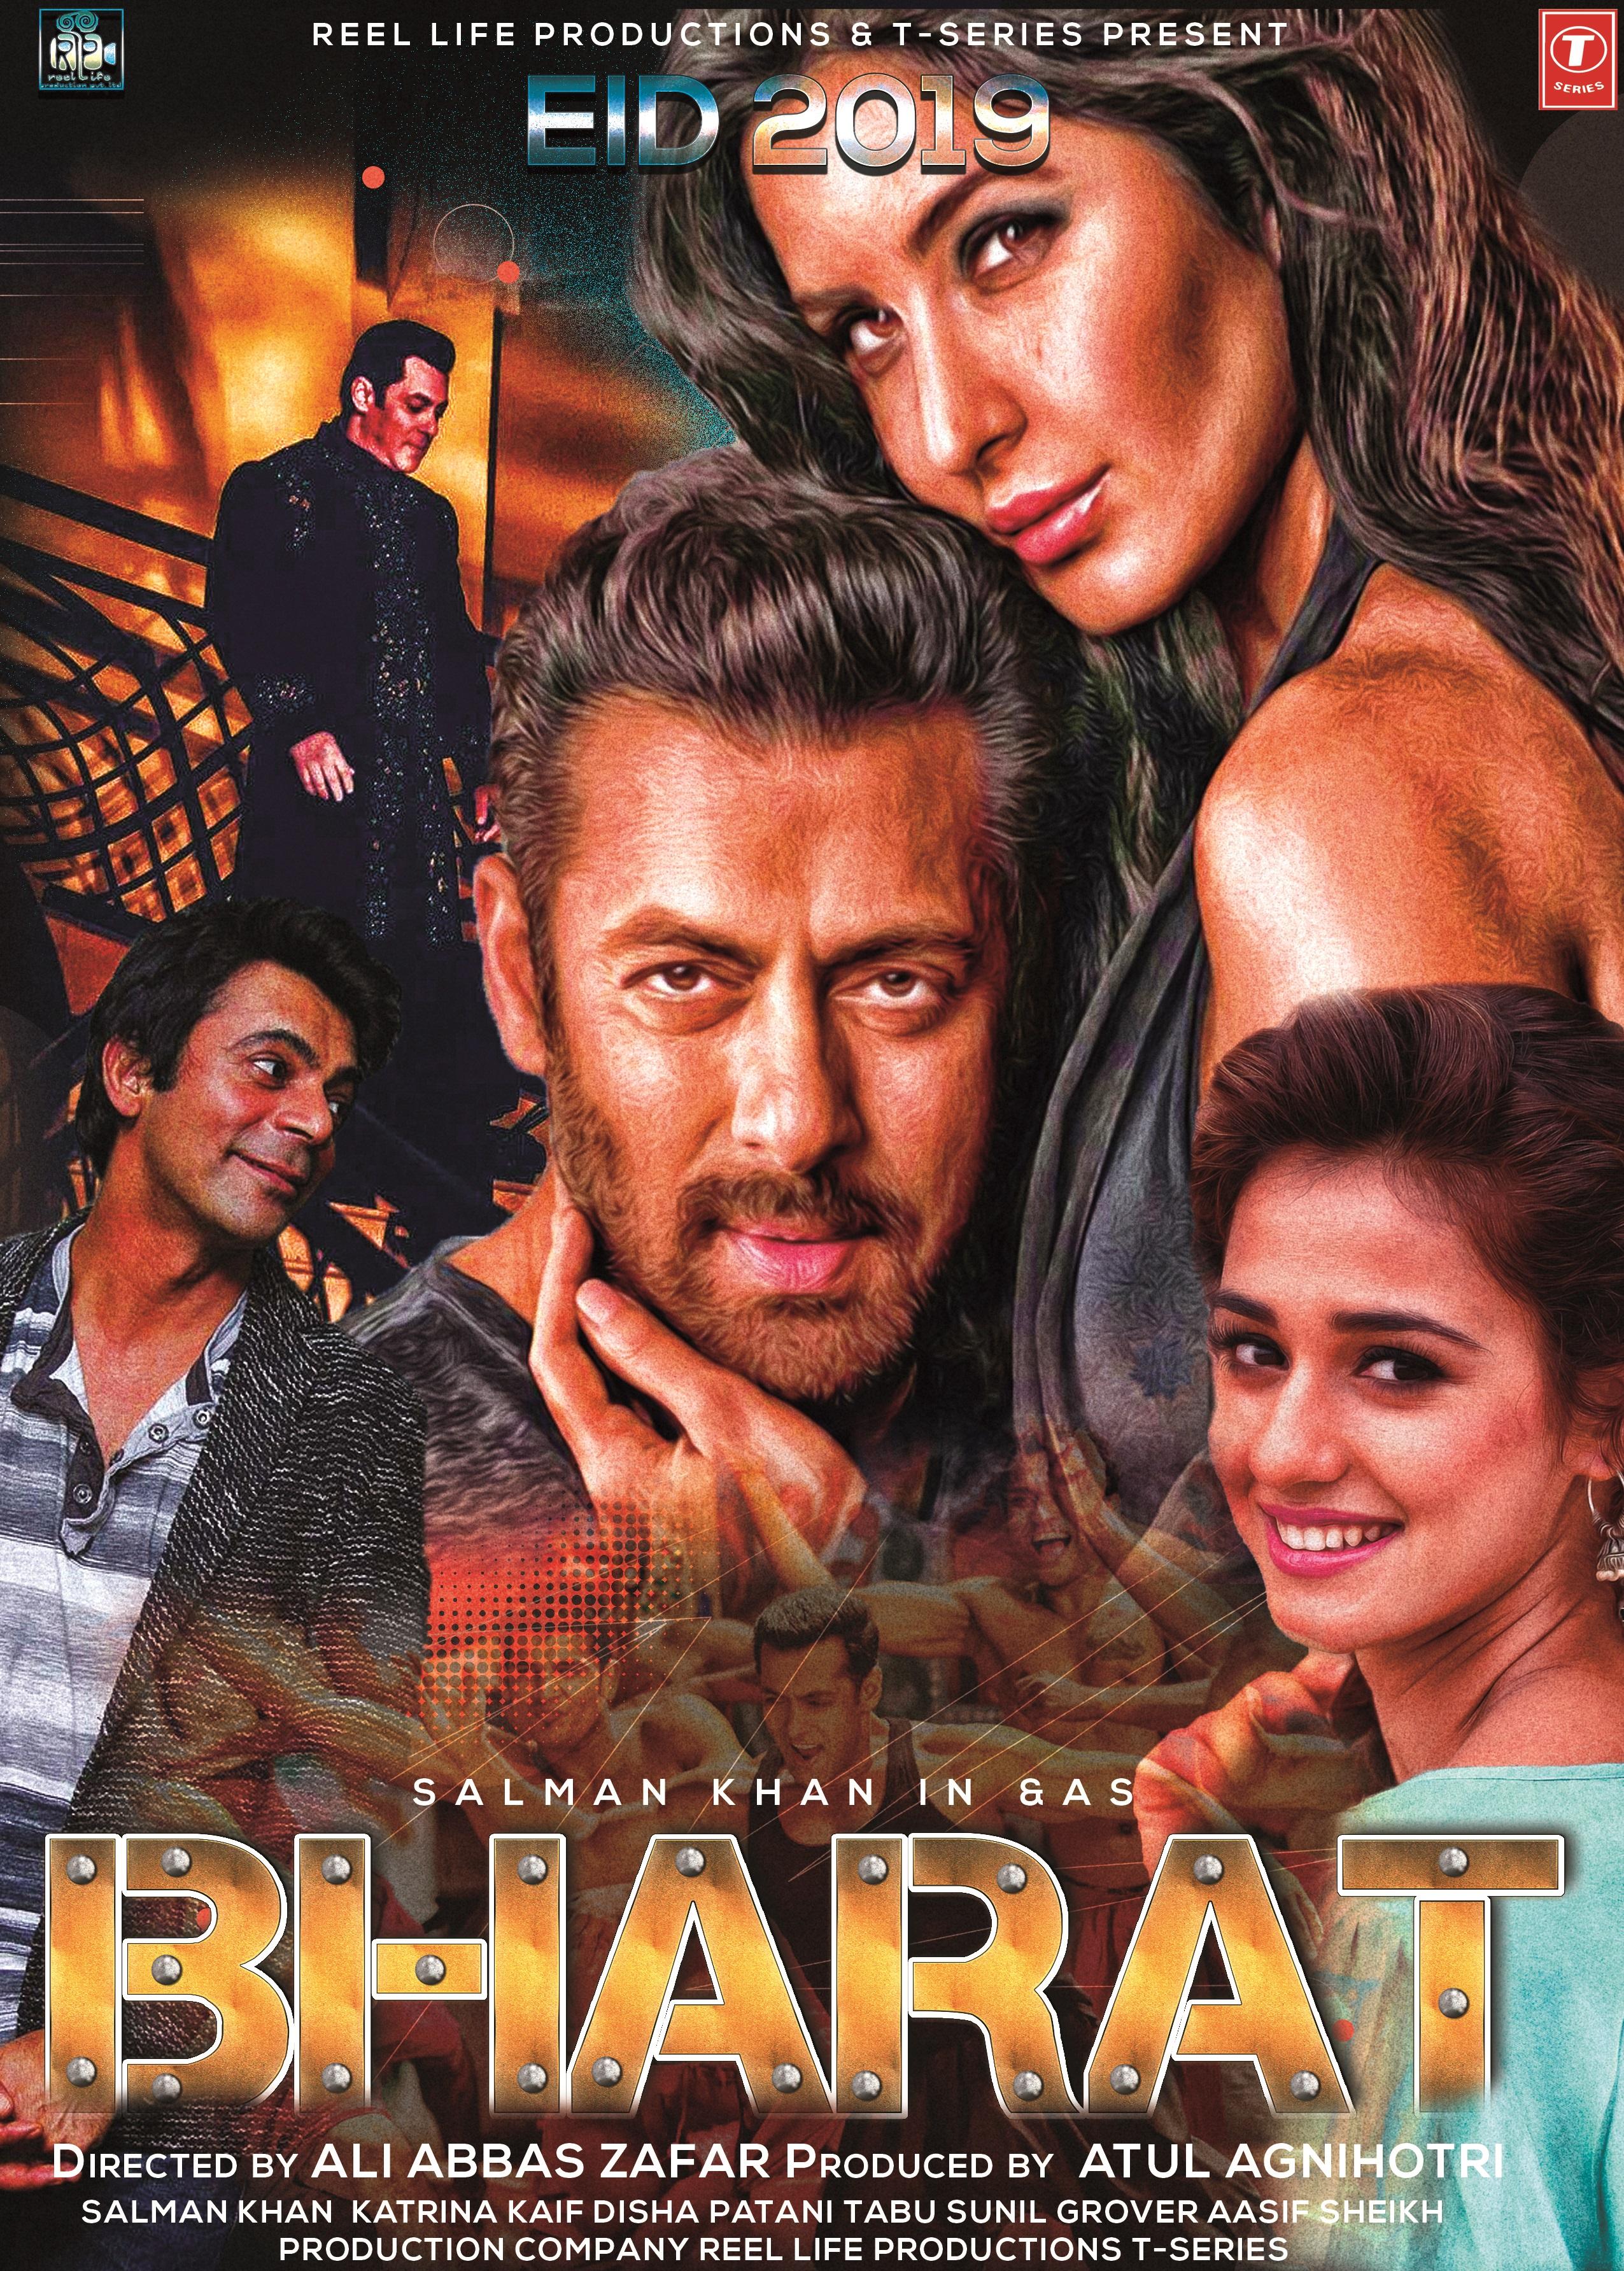 Bharat Movie Wallpapers - Wallpaper Cave